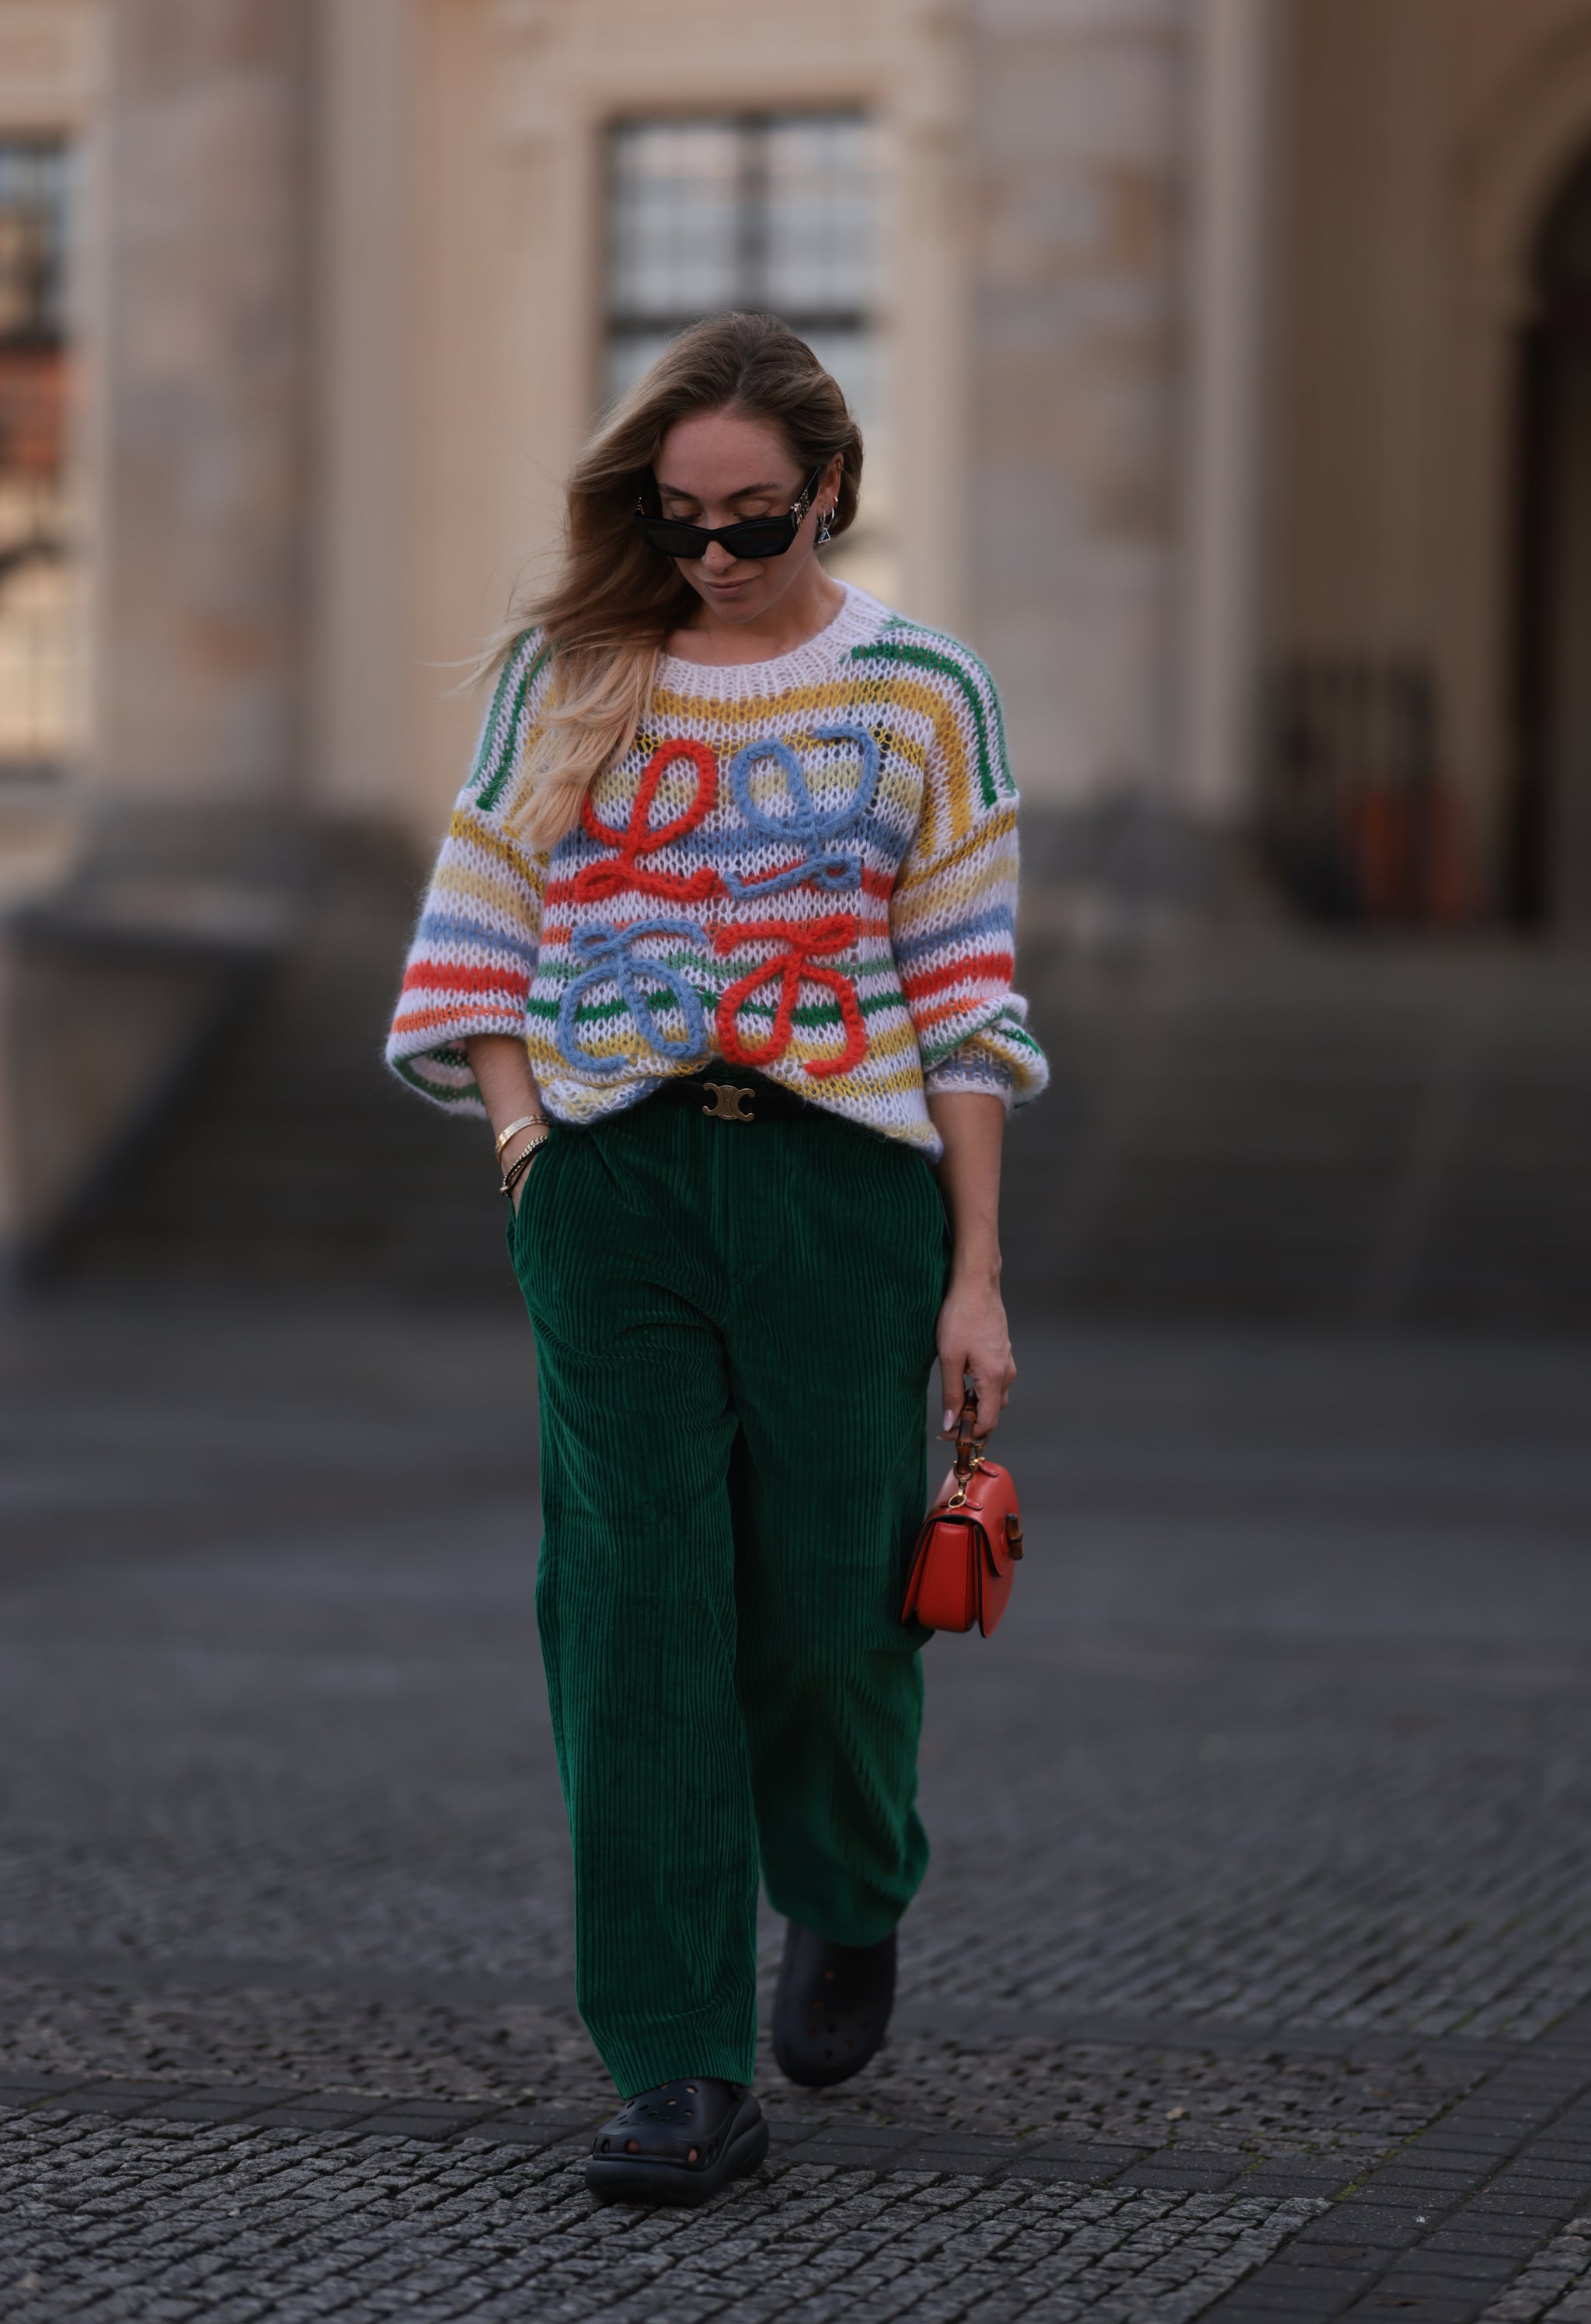 70s Corduroy Trousers + Crocs + Colourfully Stitched Sweater, 15 Outfit  Ideas to Style Crocs Like a Pro